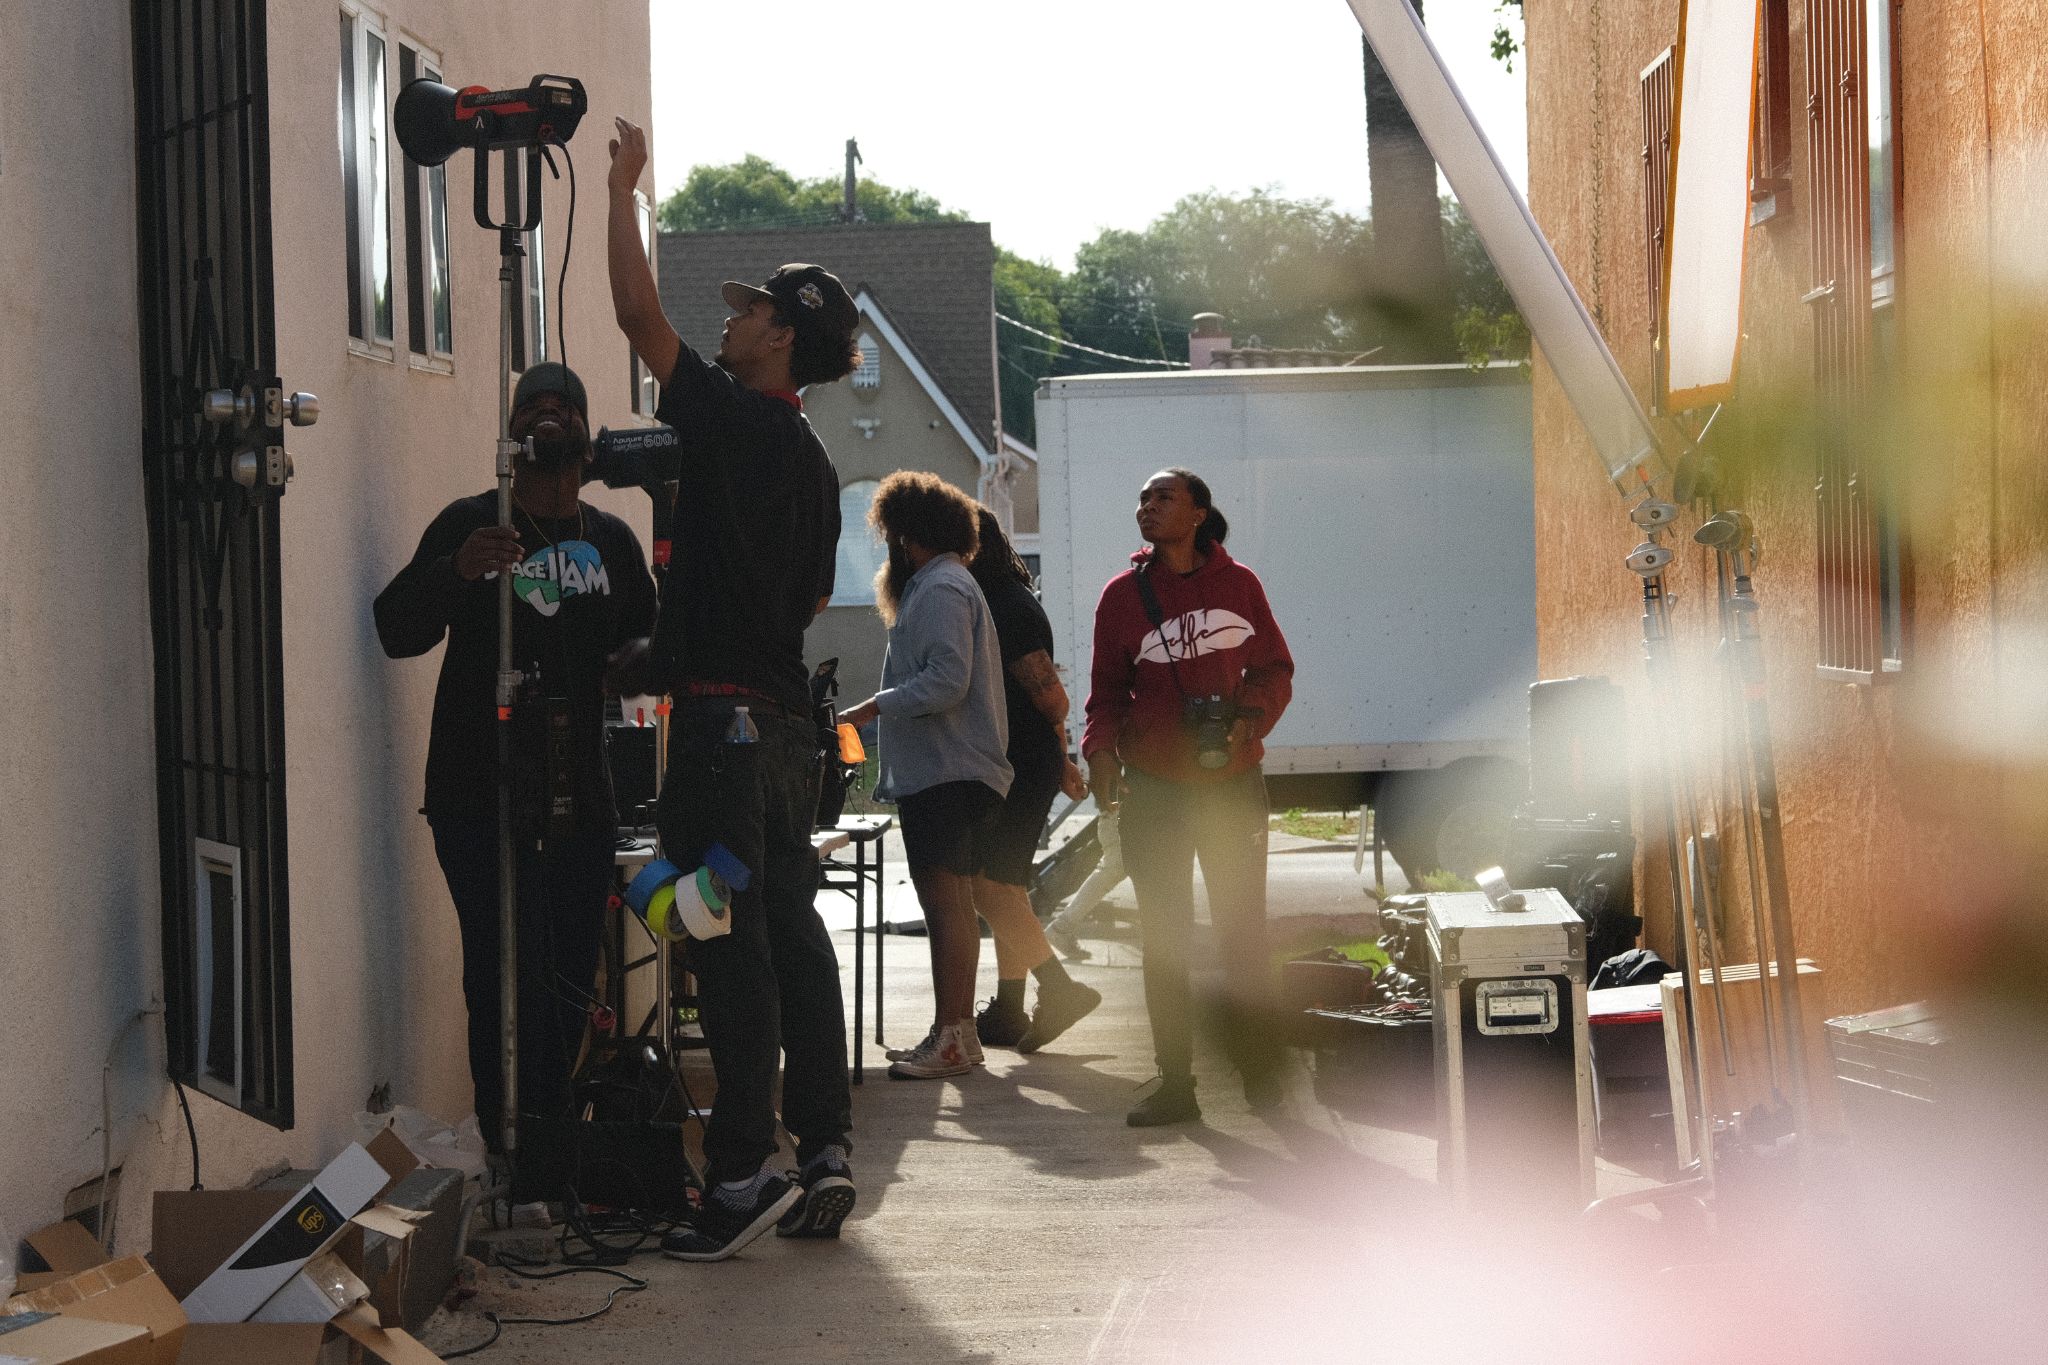 IU C&I Studios Page C&I Studios Blog What Makes a Good Grip Male and female crew members setting up a set with equipment